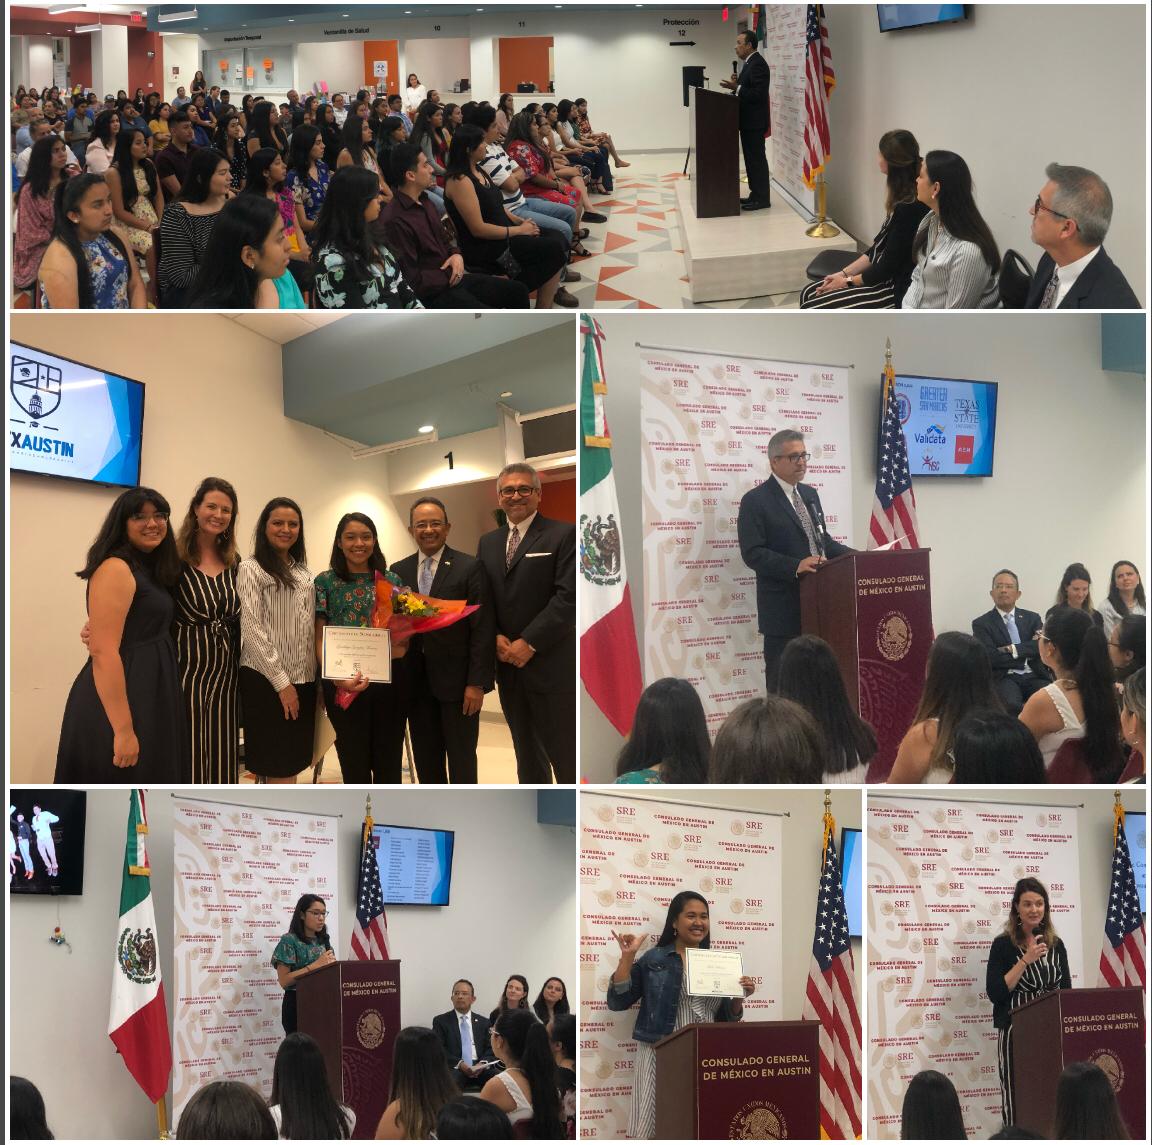 🎉👏🏽Congrats 4th/gen of #IMEBecas #MexAustin scholarships. Hispanic students represent the future of TX 👨🏽‍🎓👩🏽‍🎓. Thanks to our partner, @foundcom, to our keynote, @Ruelas30606, to our many sponsors & to t/evaluators who participated in t/selection process. Almost 500 grants in 4 yrs